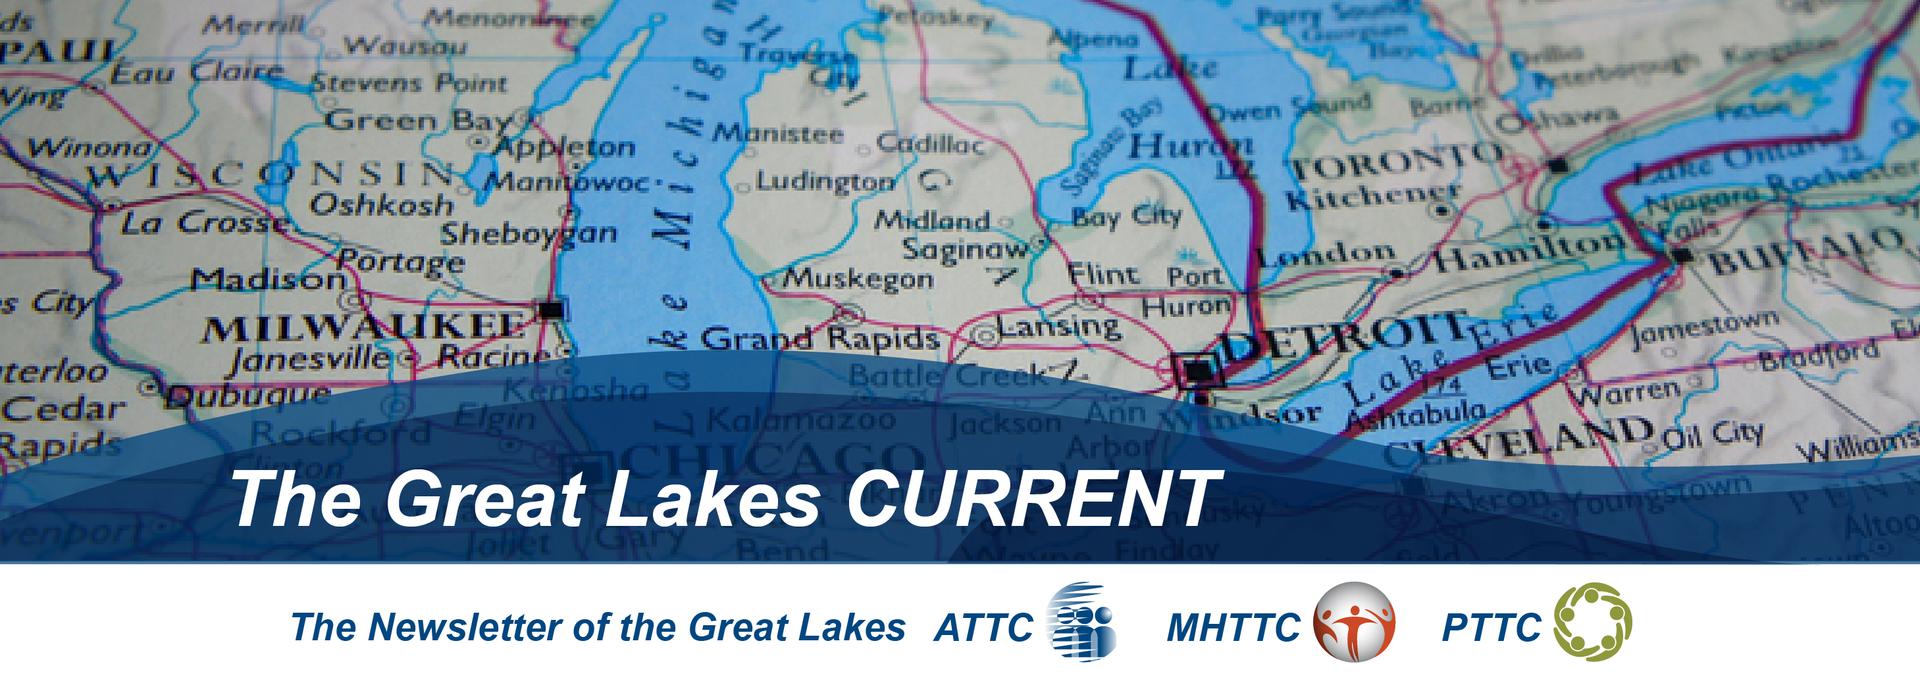 Great Lakes Current Header Image